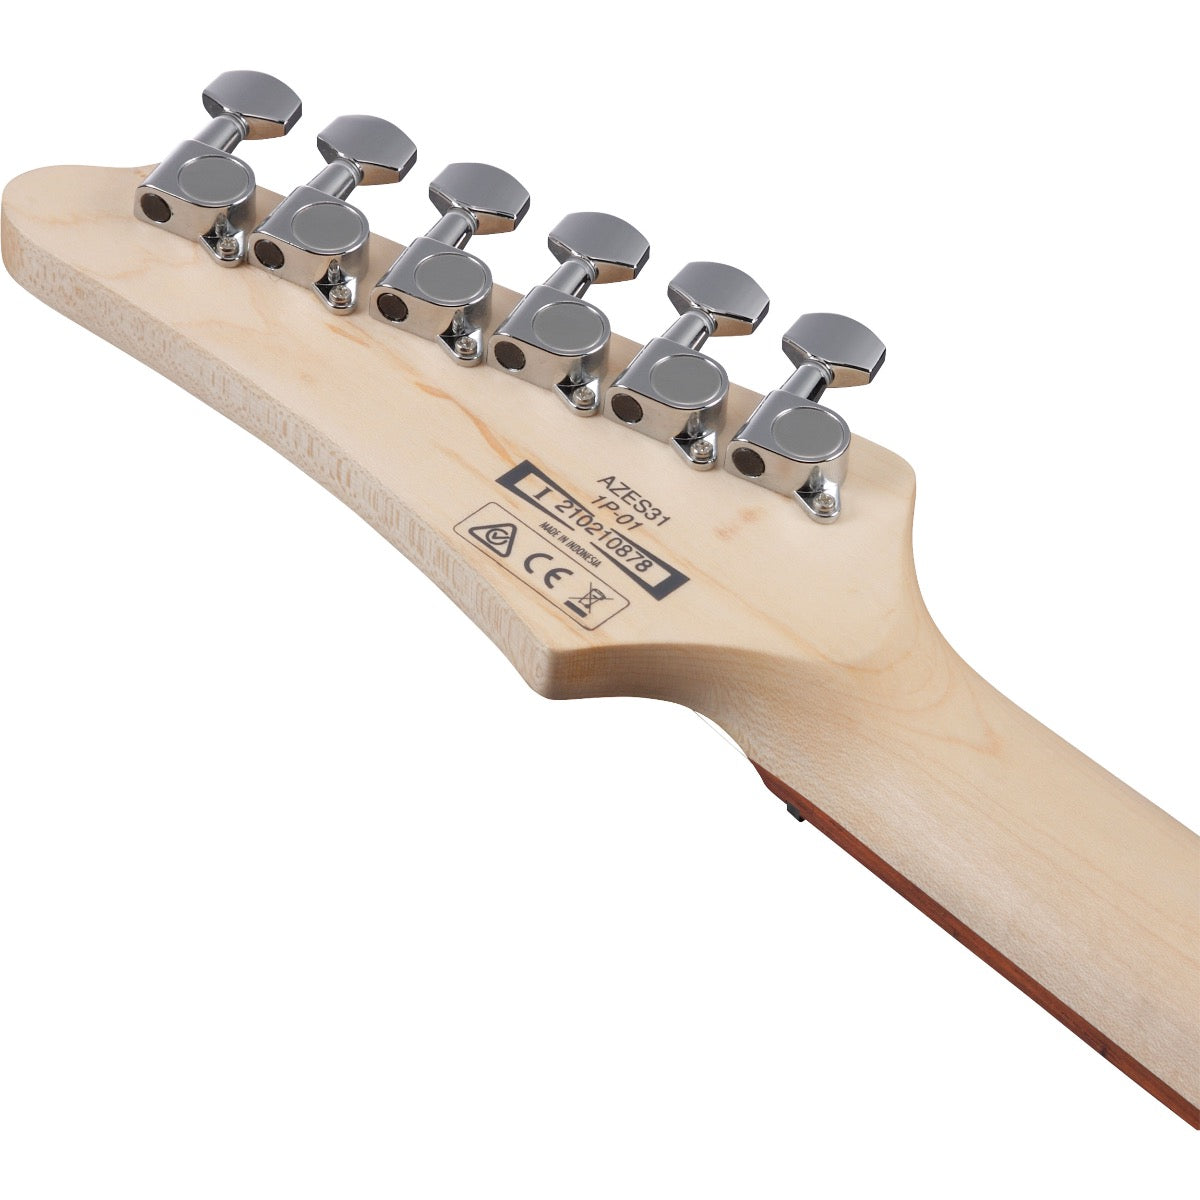 Detail view of Ibanez AZES31 Electric Guitar - Ivory showing back of headstock and portion of neck